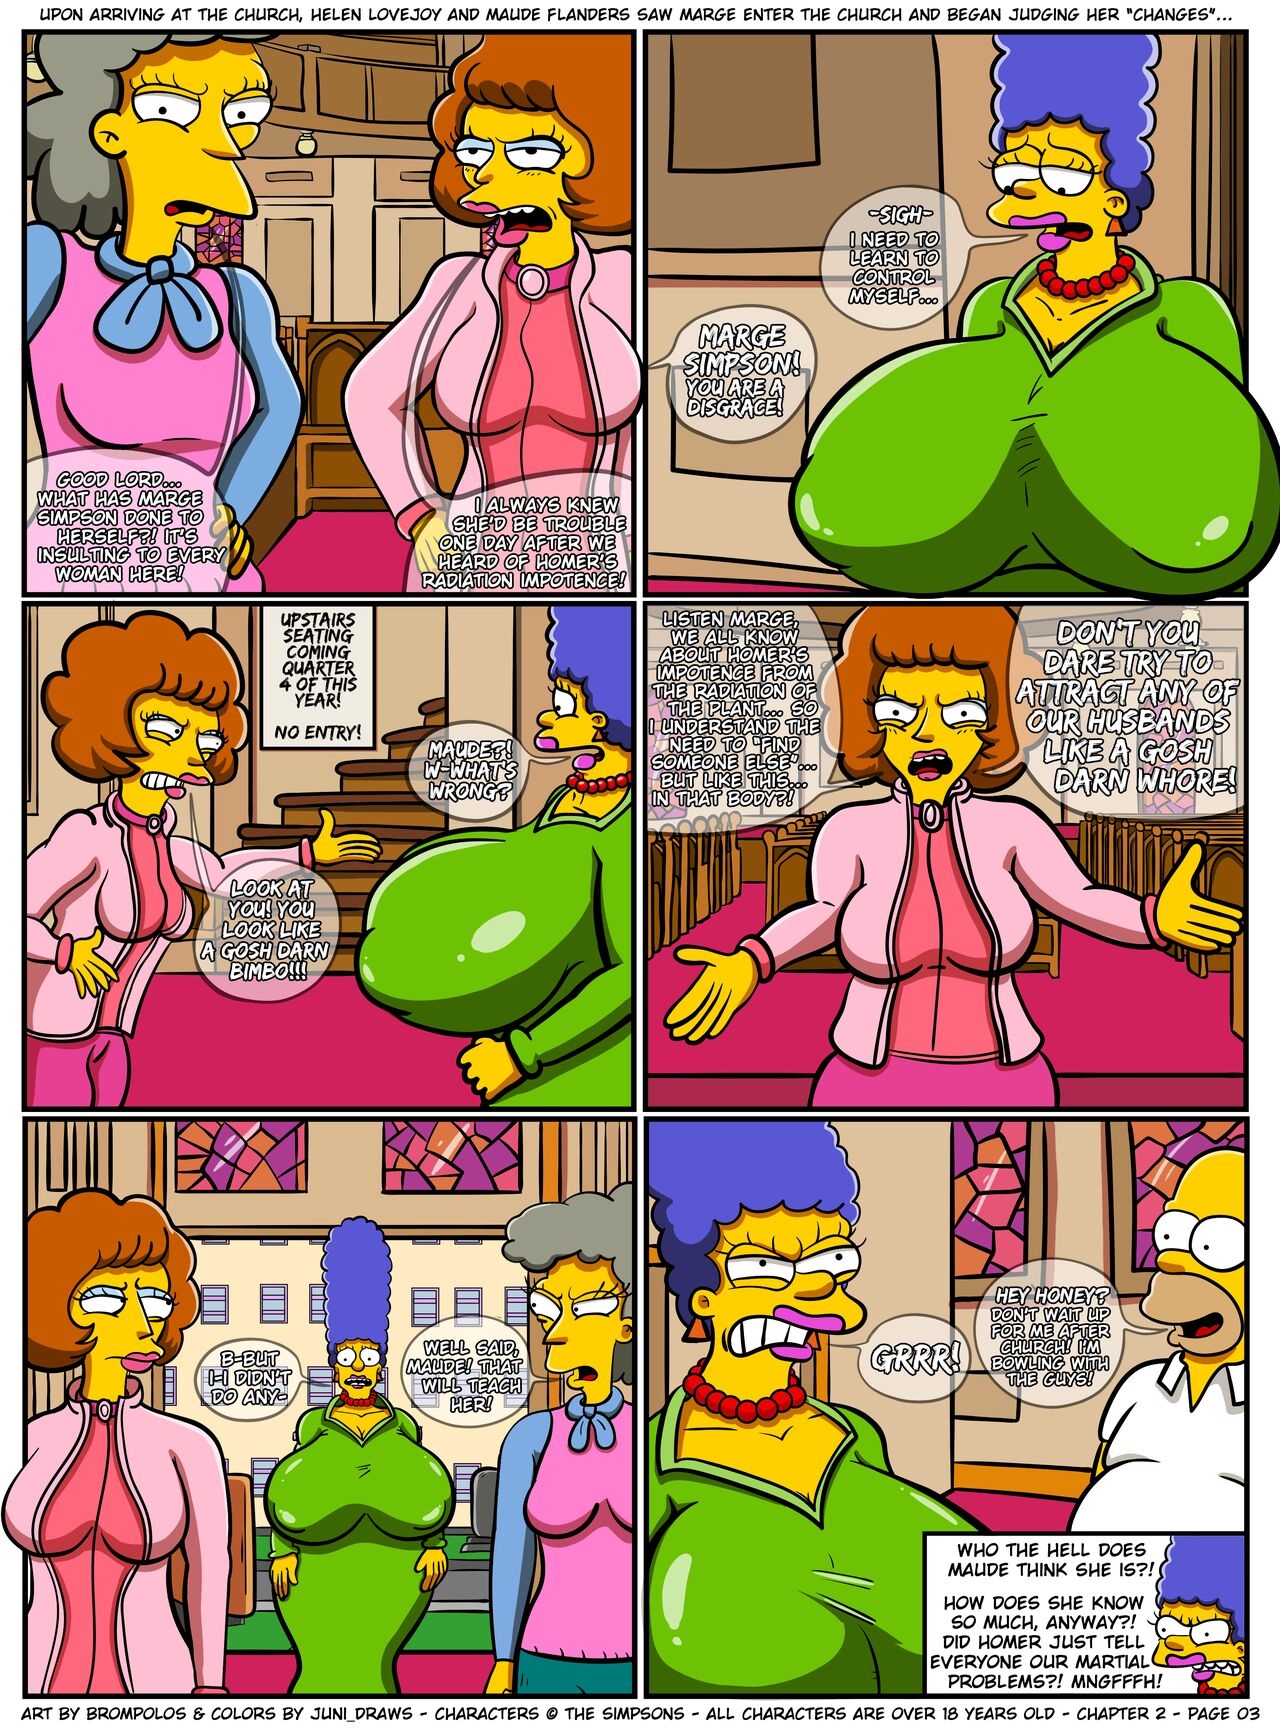 [Brompolos/Juni_Draws] The Sexensteins (Simpsons) [Ongoing] 51